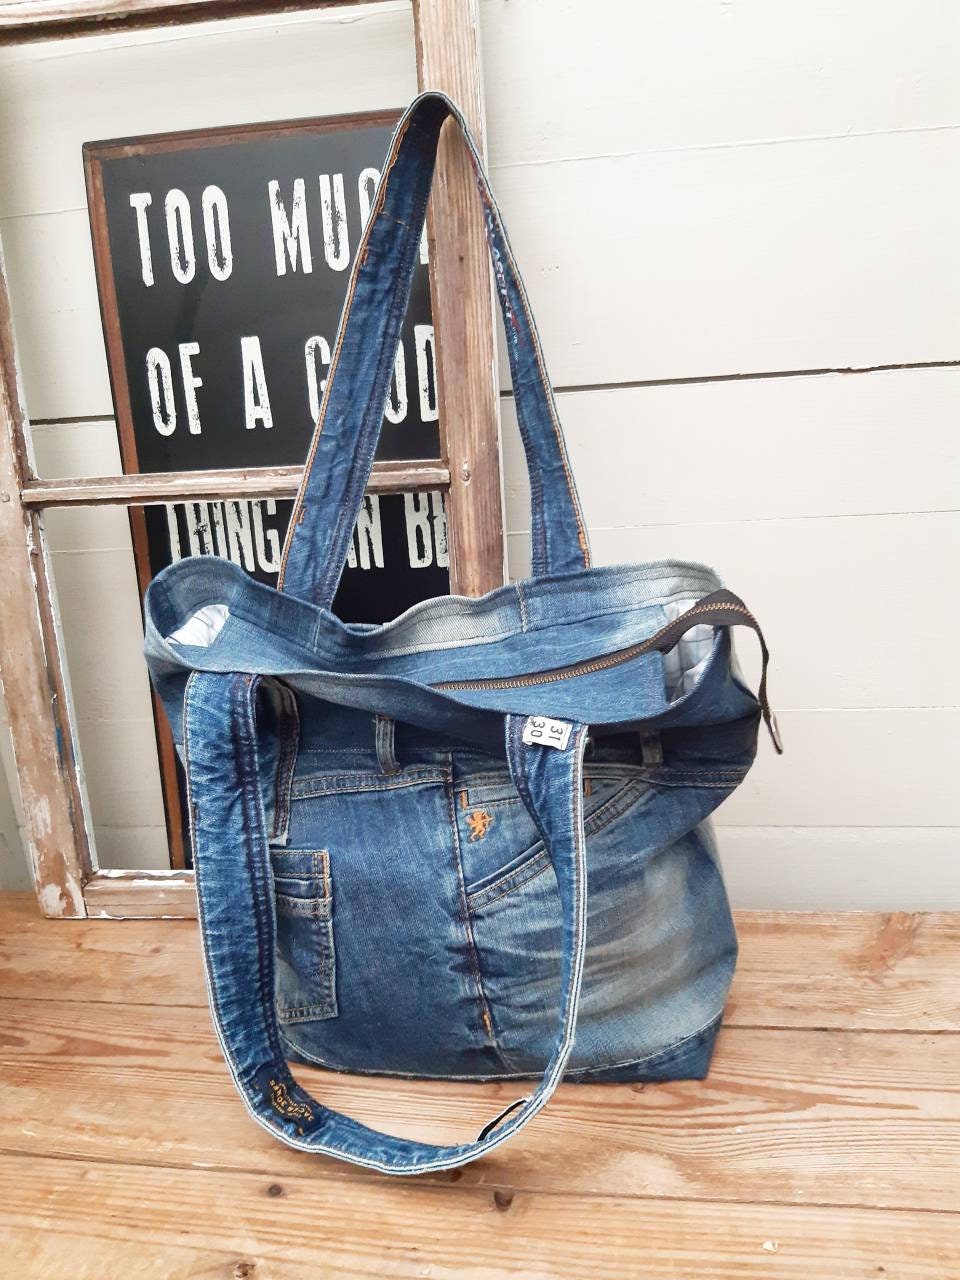 Relaxed Jeans shopper with zipper jeans tote bag big jeans | Etsy